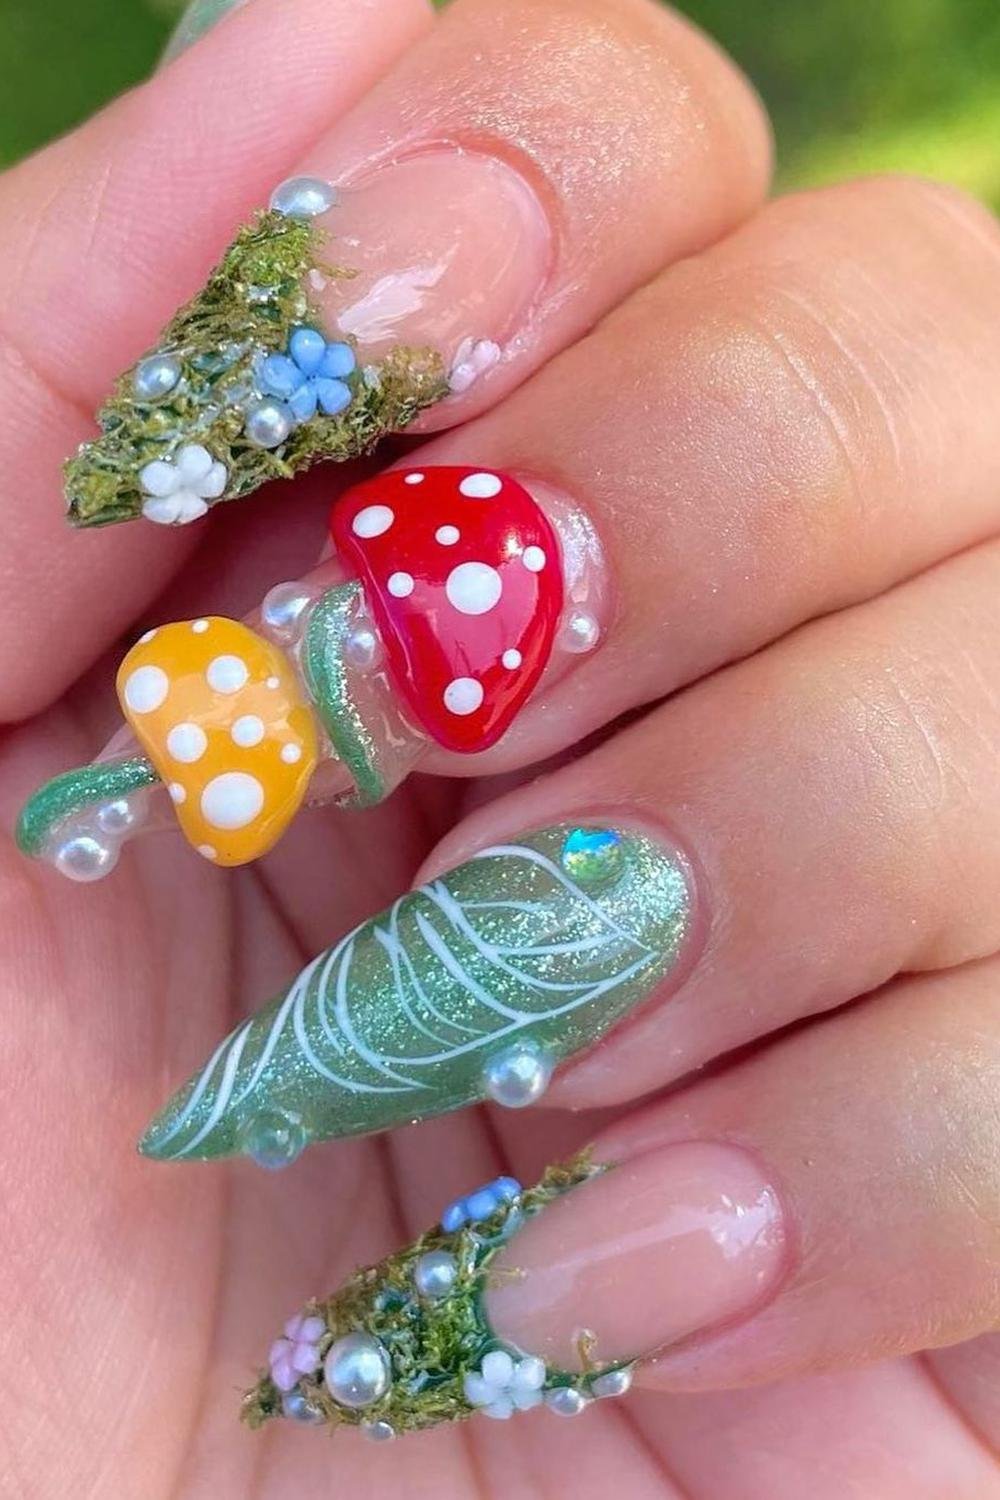 2 - Picture of Whimsical Nails